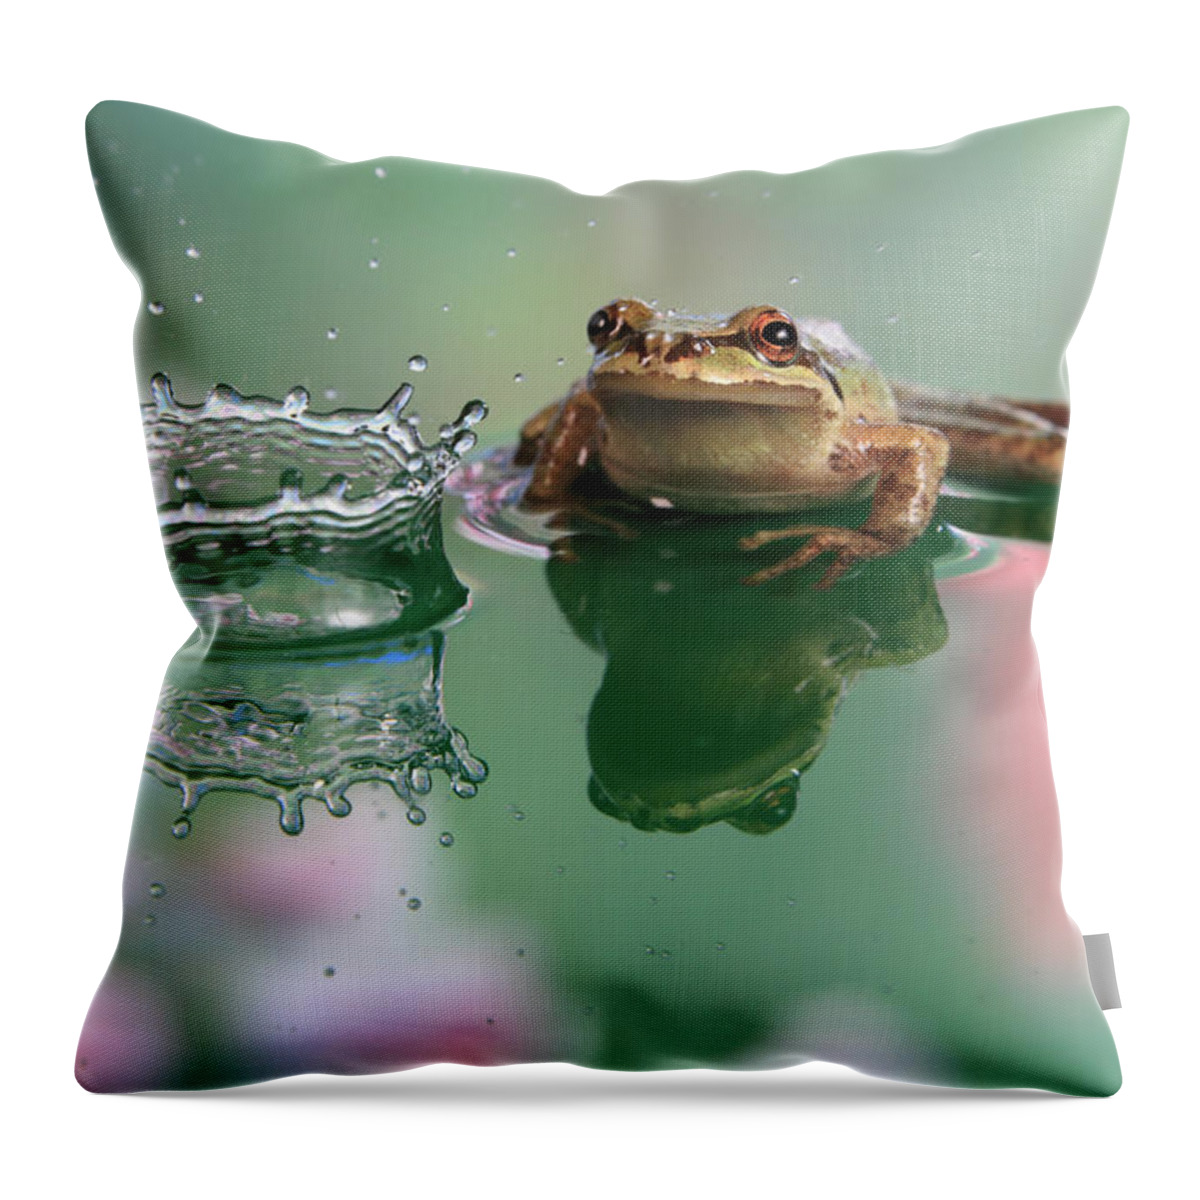 Macro Throw Pillow featuring the photograph Observation by William Lee